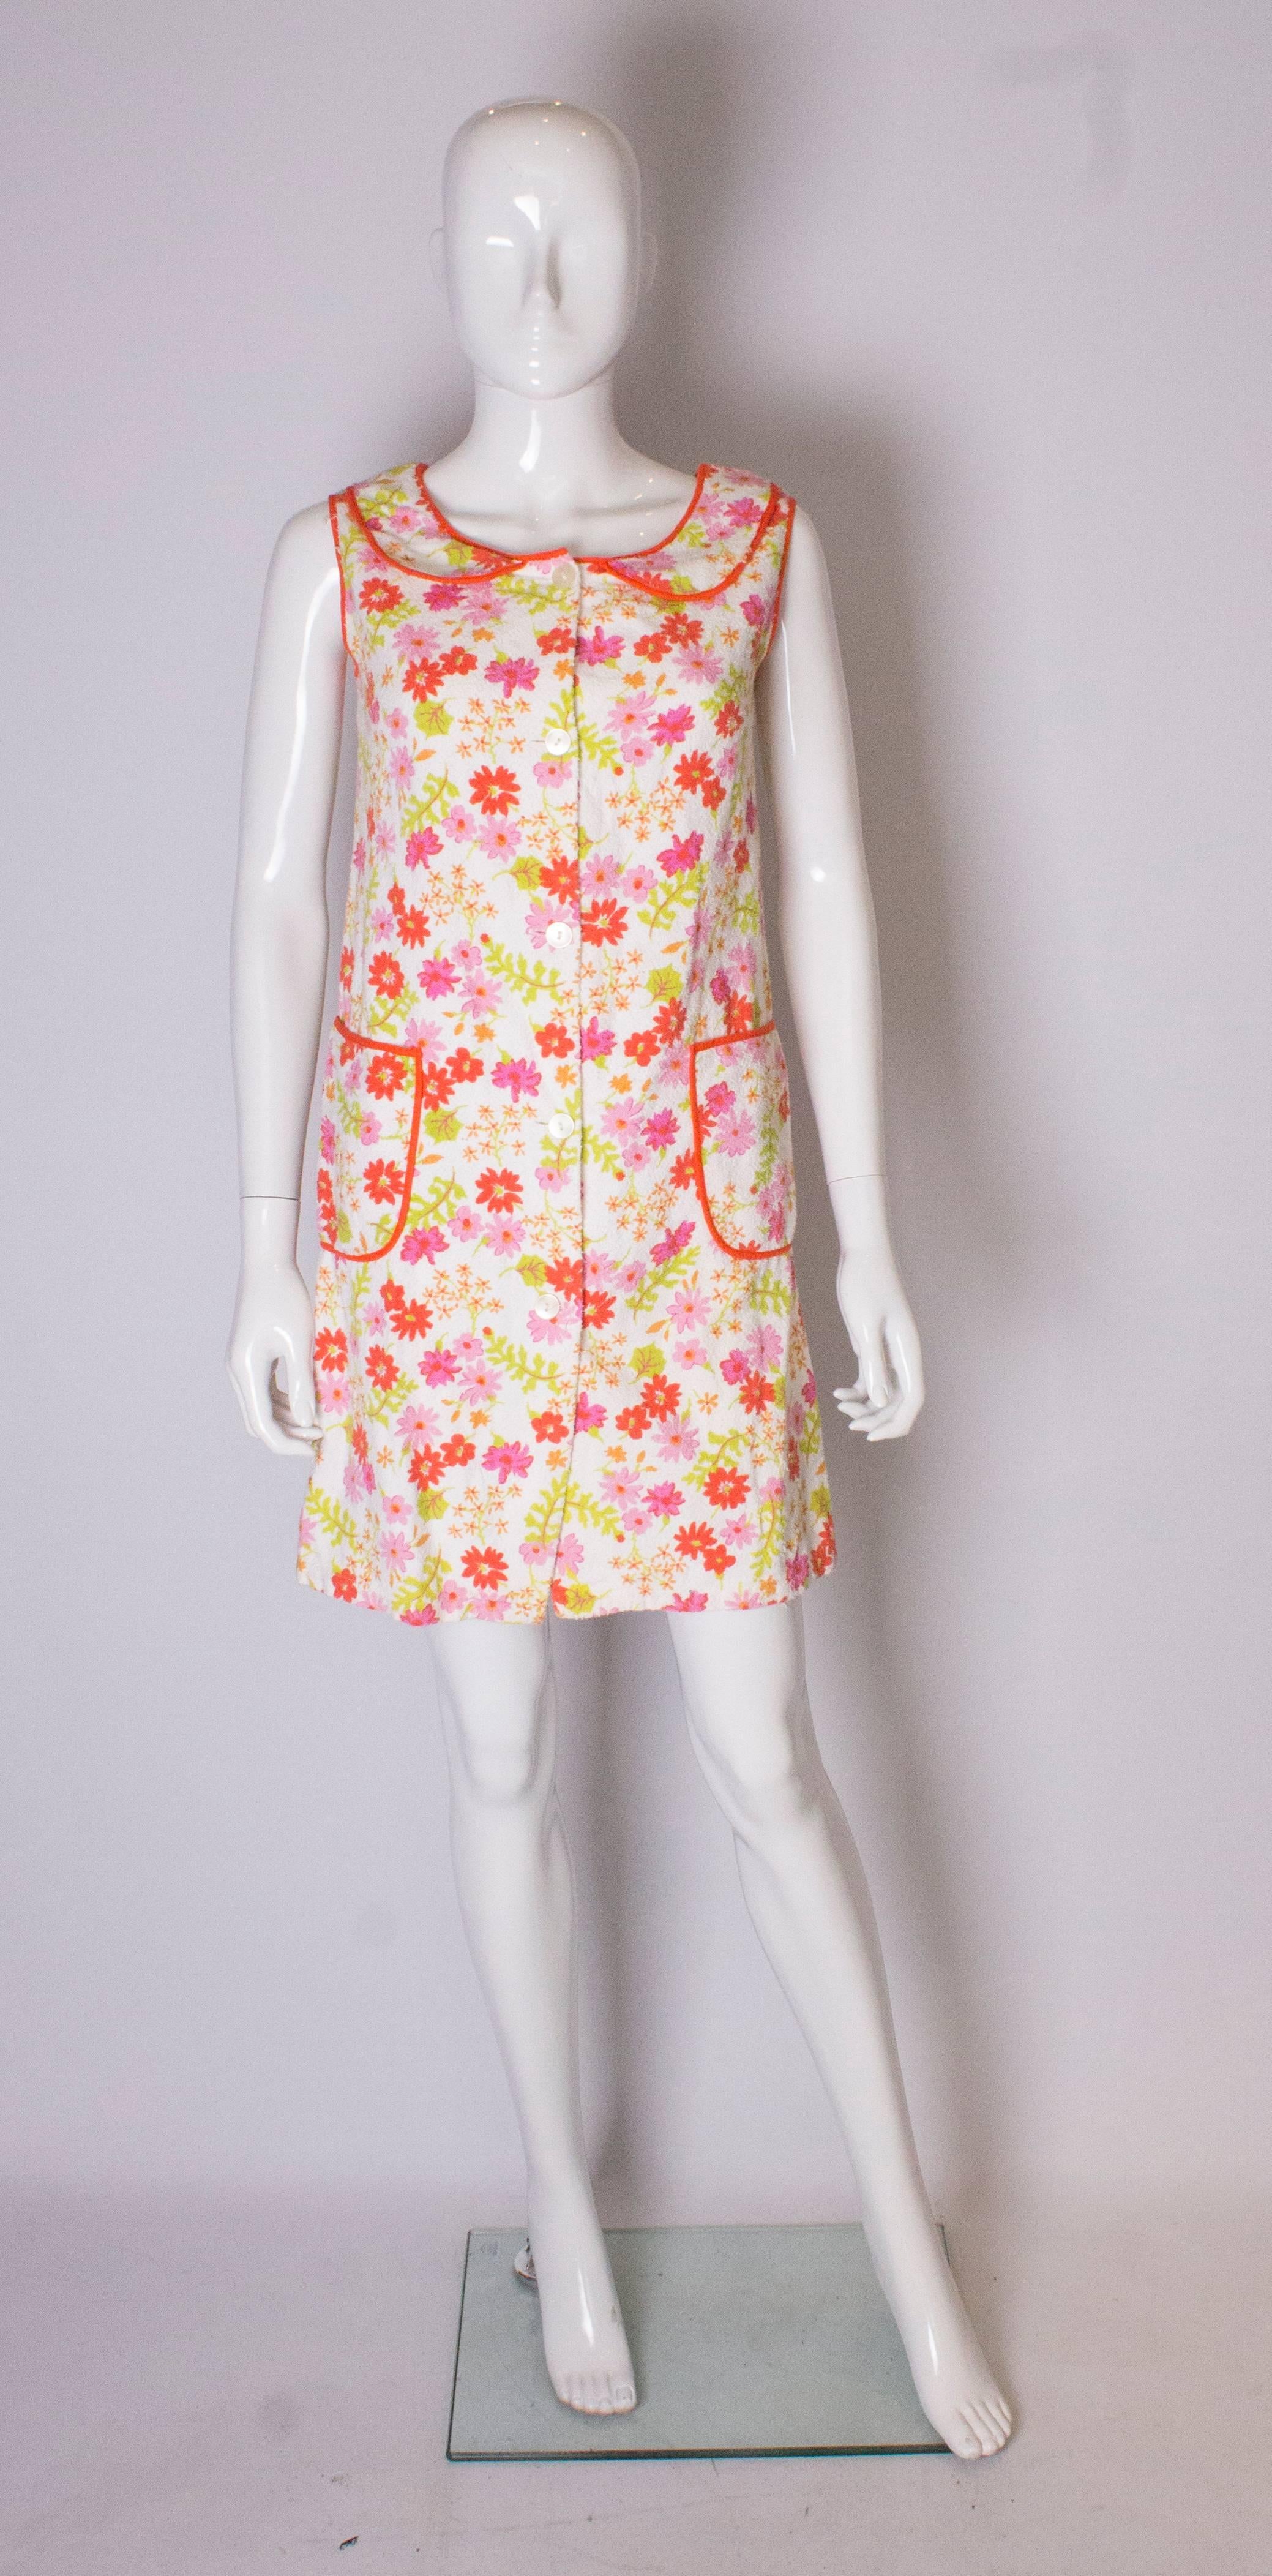 A pretty towelling  summer dress for city or coast.   The dress has a white background with a pink, red and orange floral print. It has a peter pan collar,  two pockets and  a five button  front  opening.